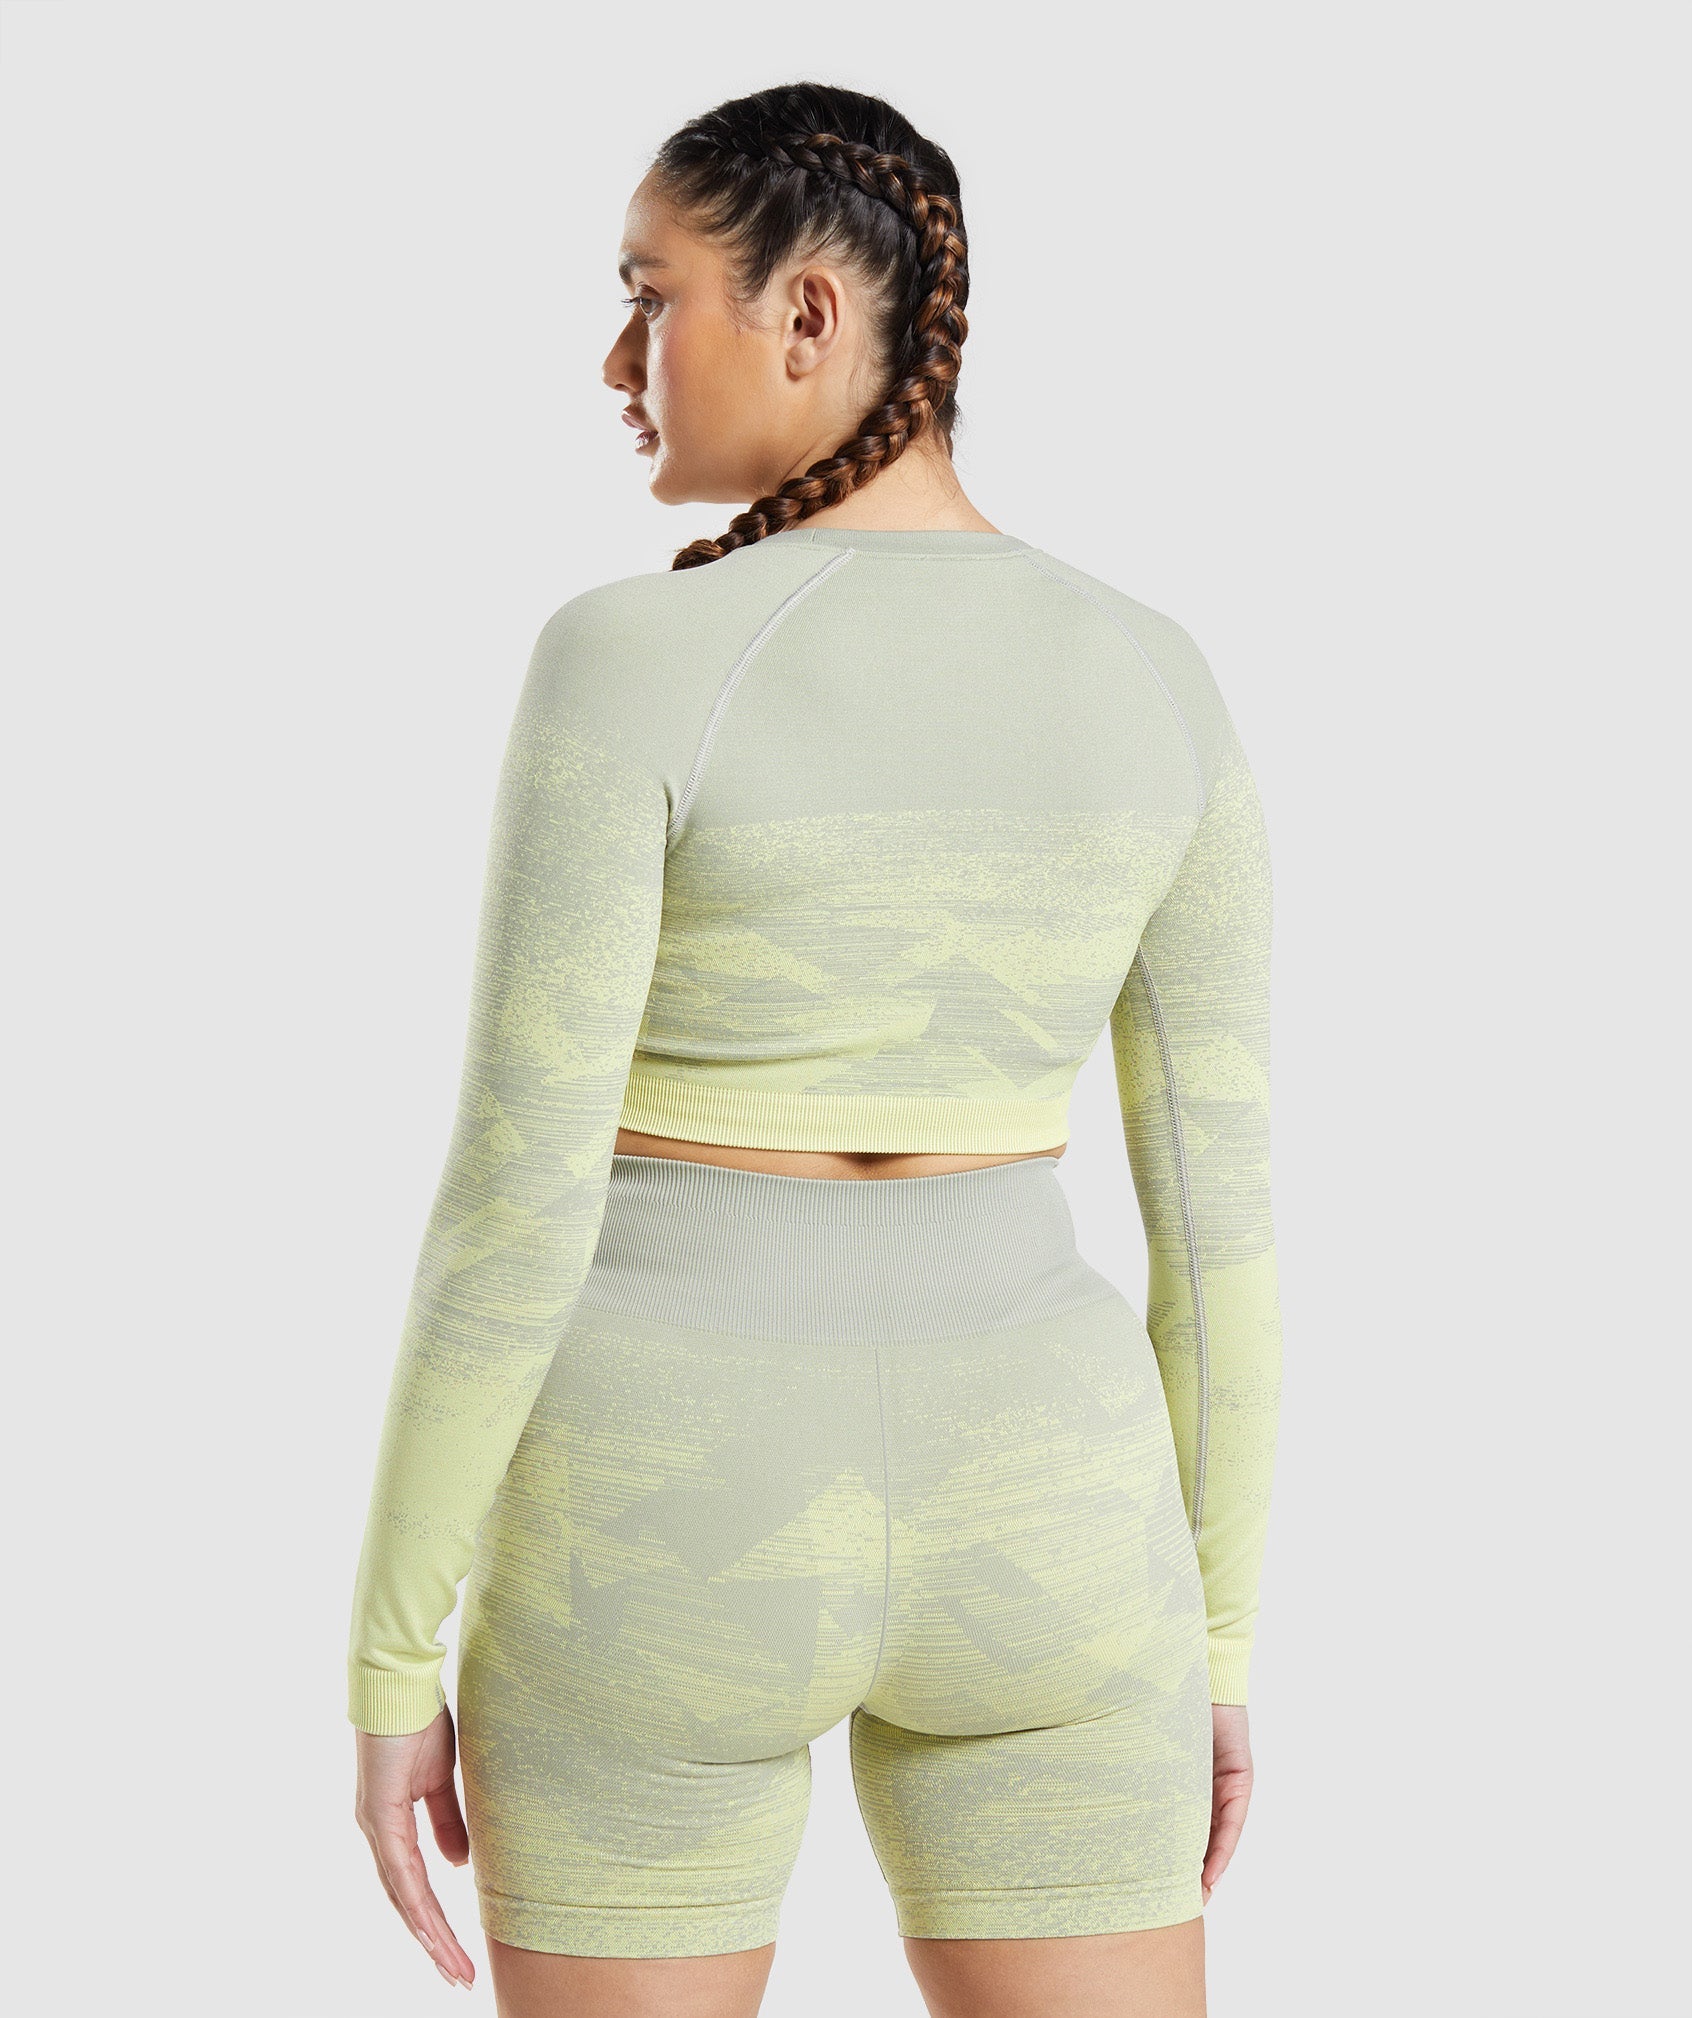 Adapt Ombre Crop Top in Triangle | Taupe Grey - view 2